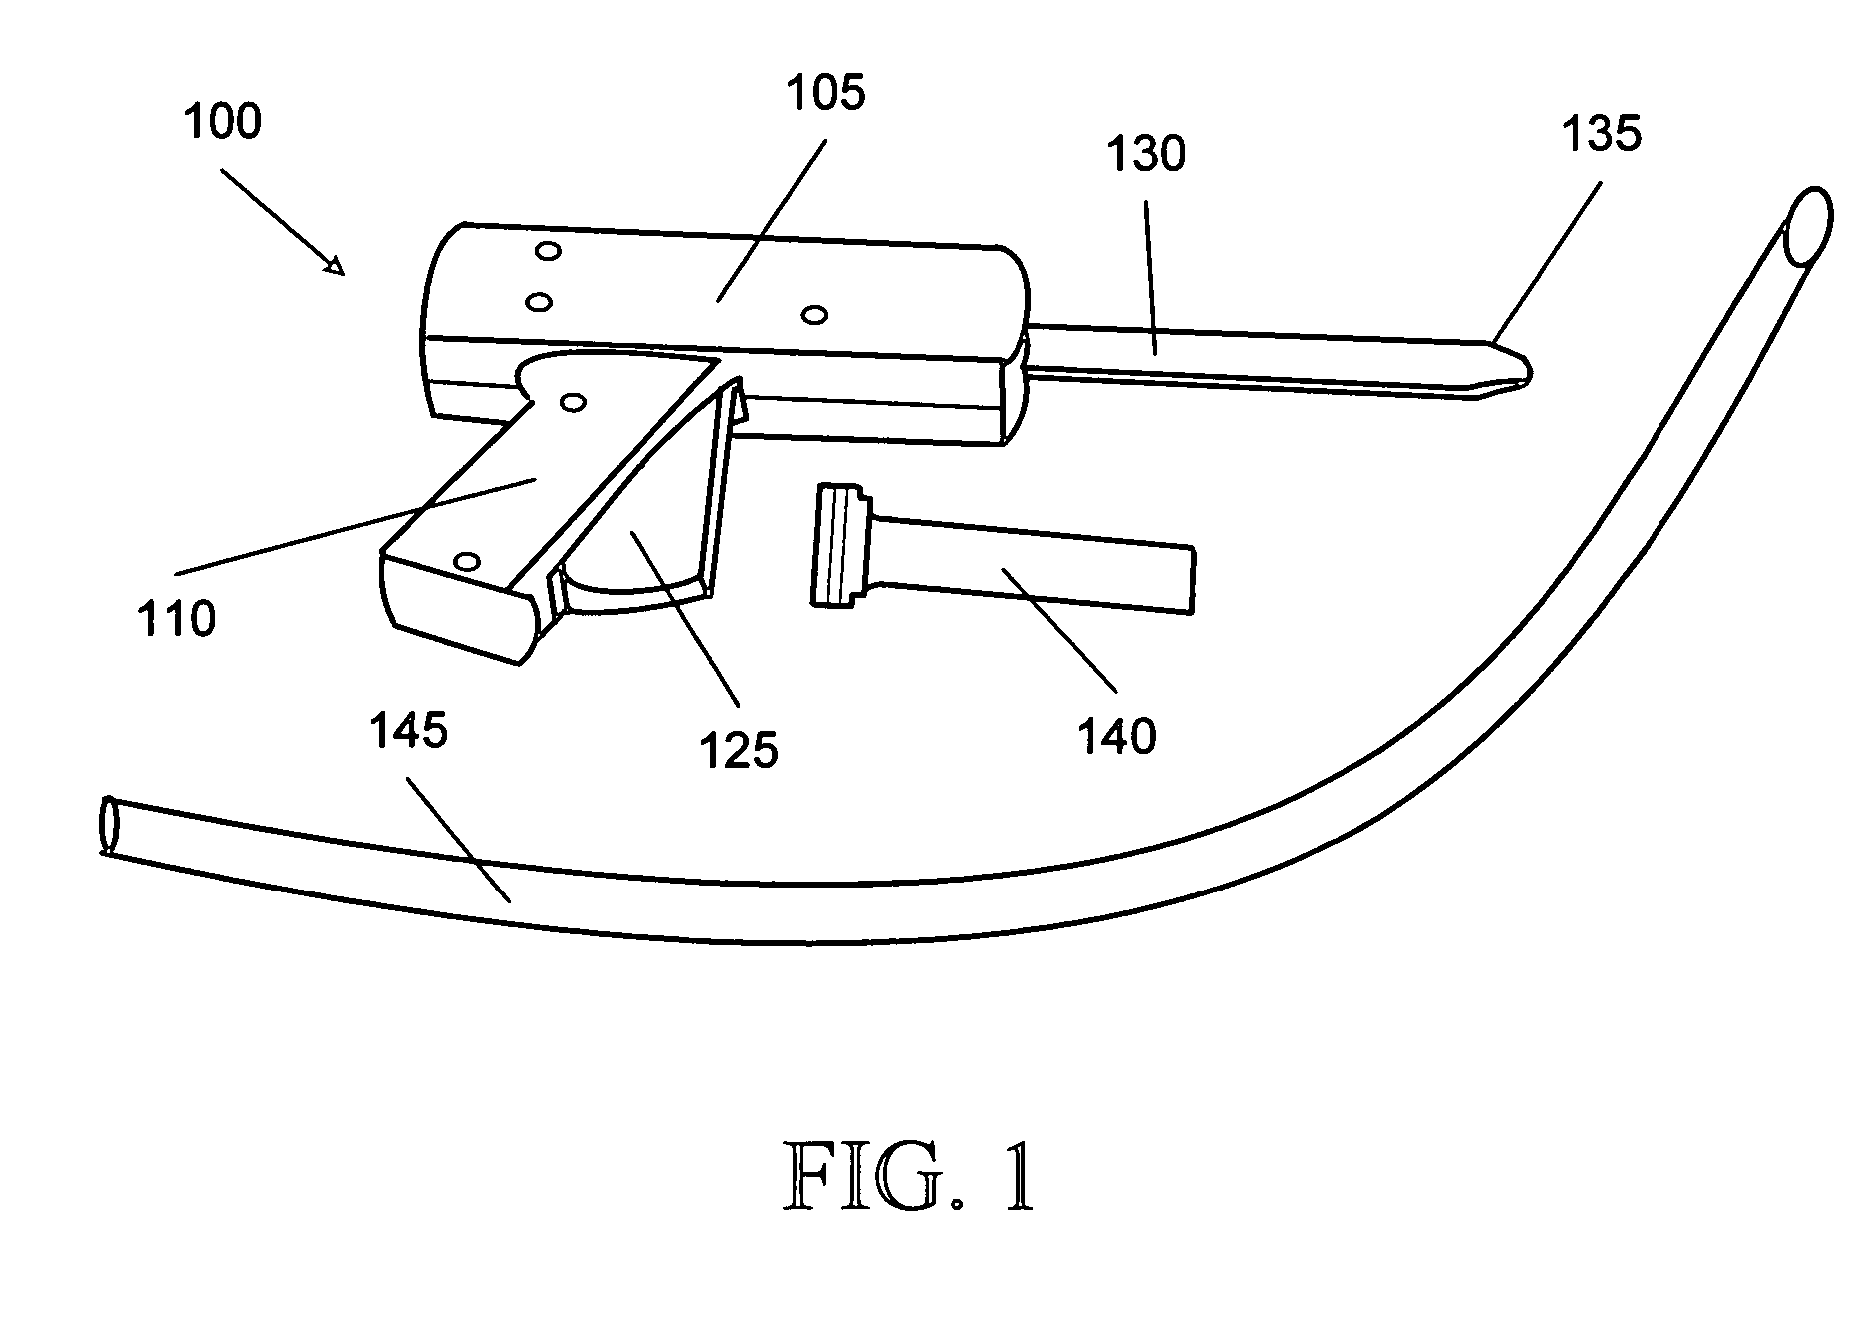 System and method for rapid placement of chest tubes